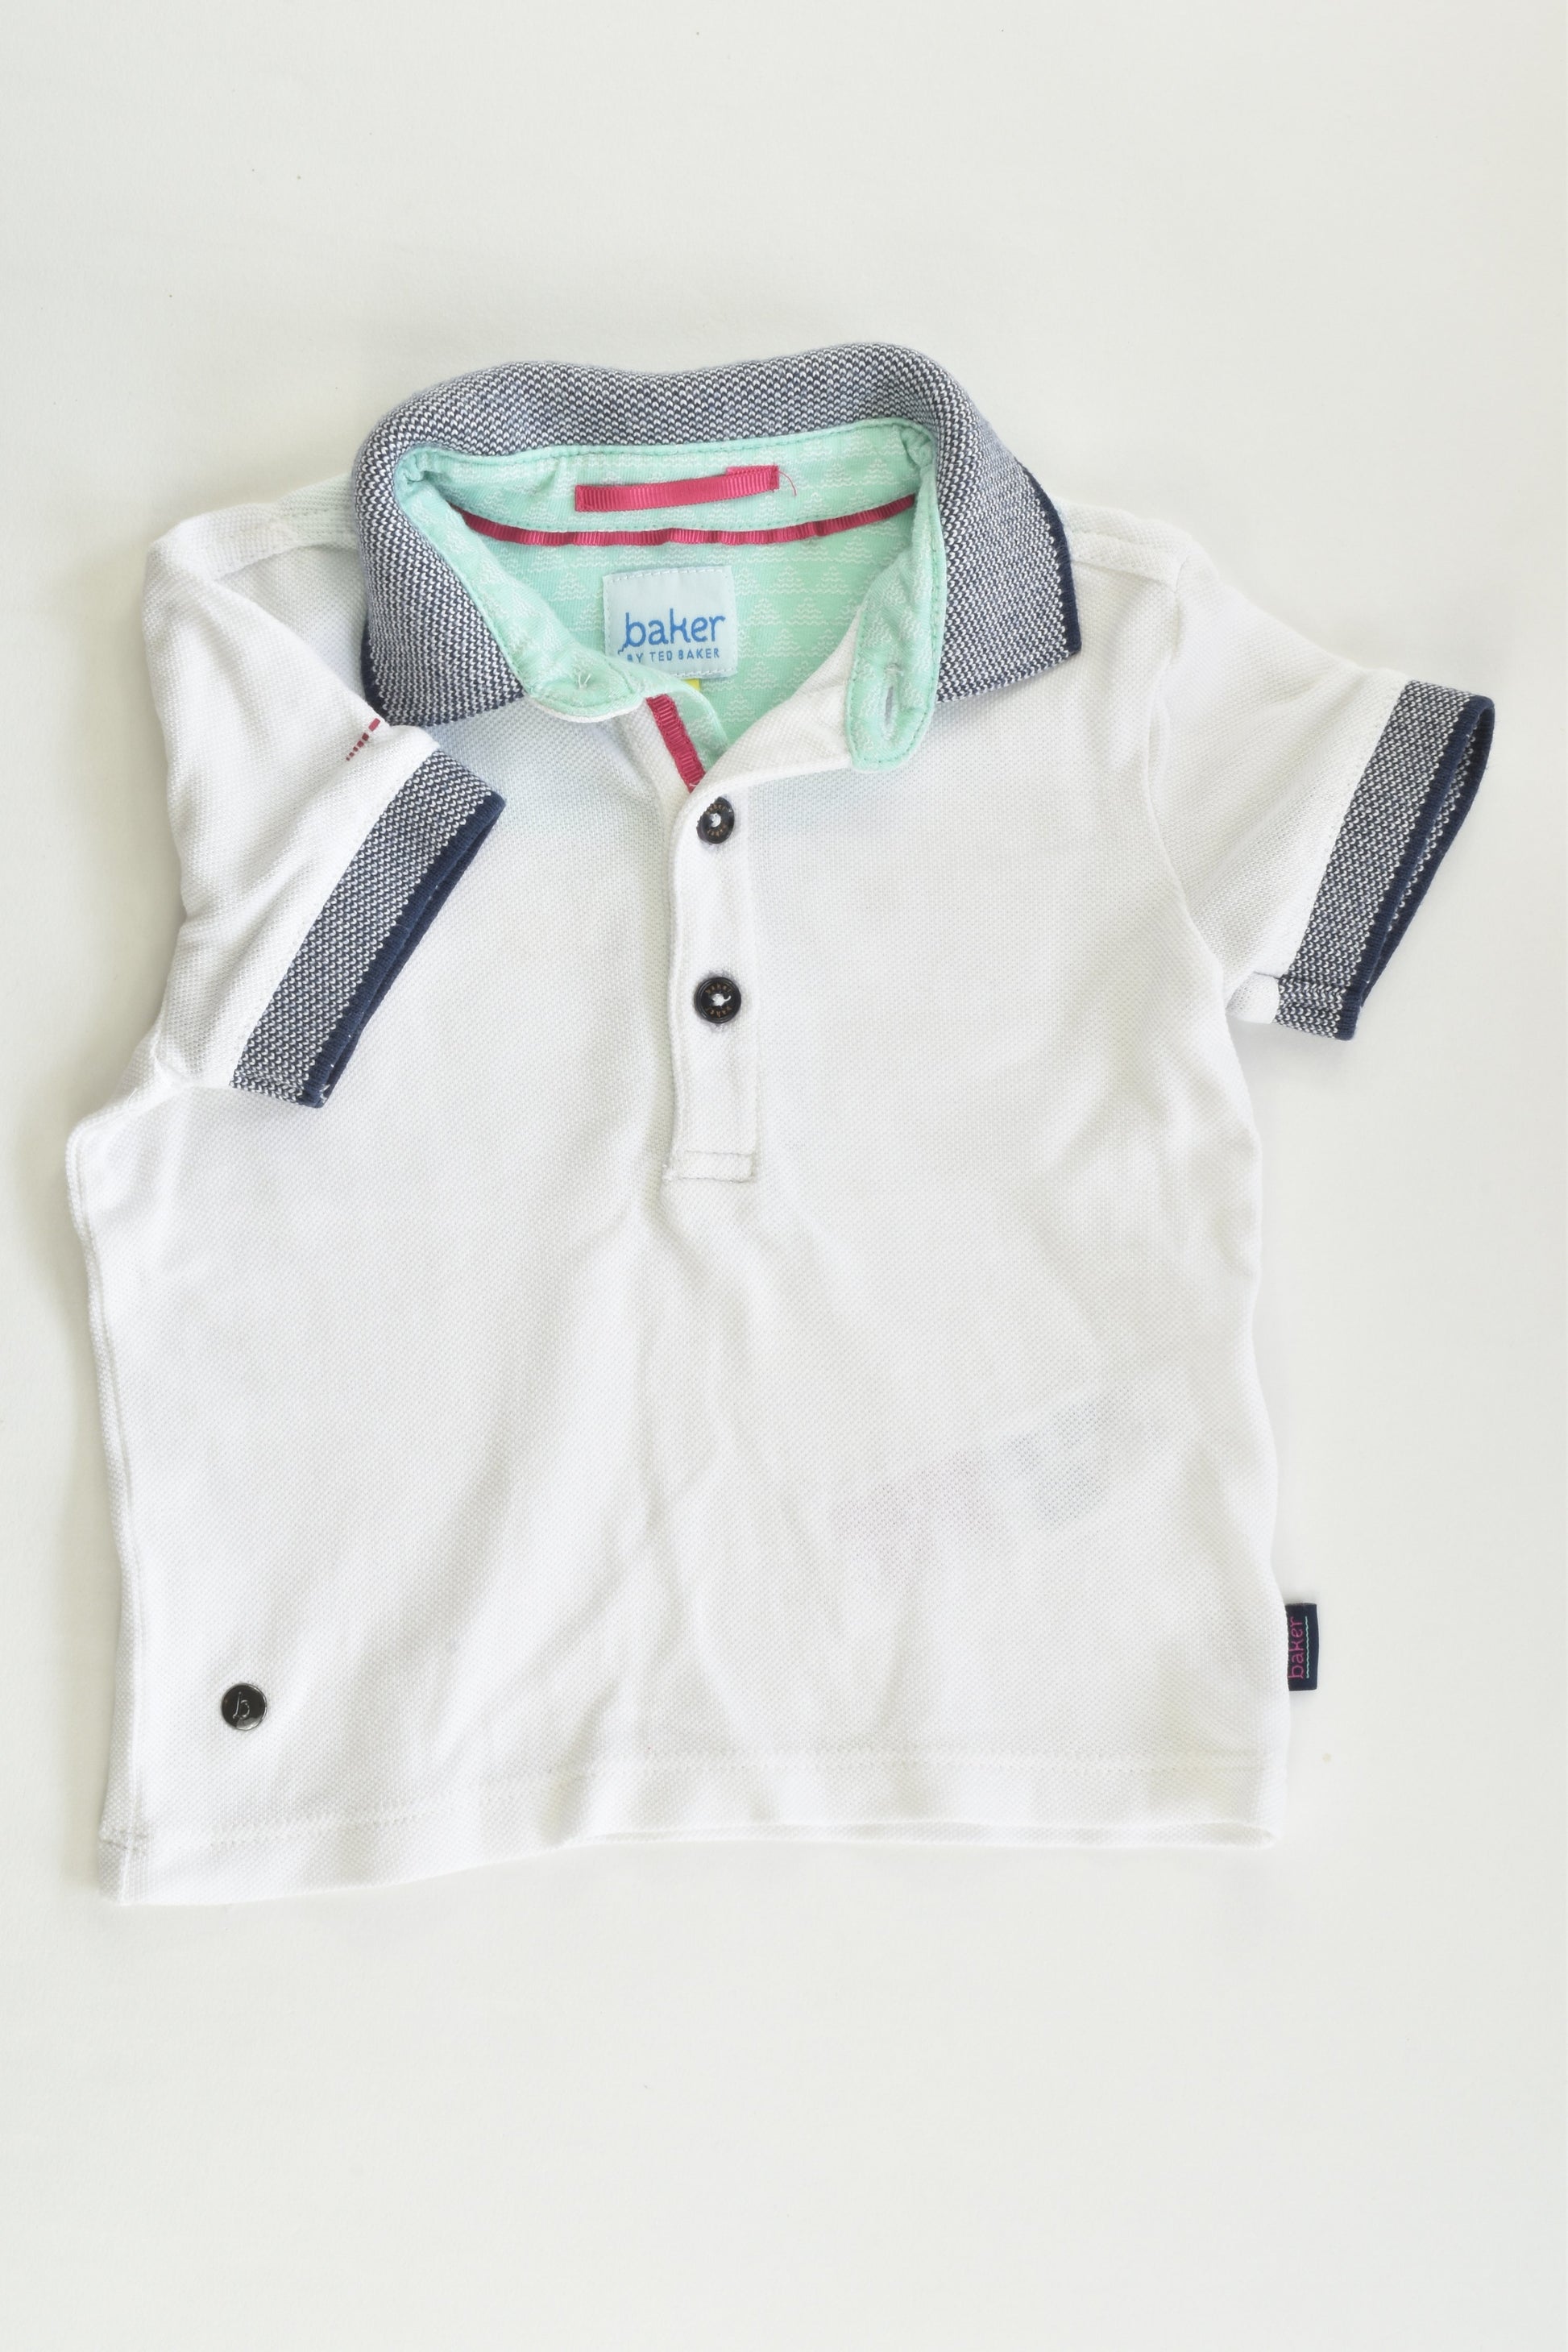 Baker by Ted Baker Size 00 (3-6 months) Polo Shirt